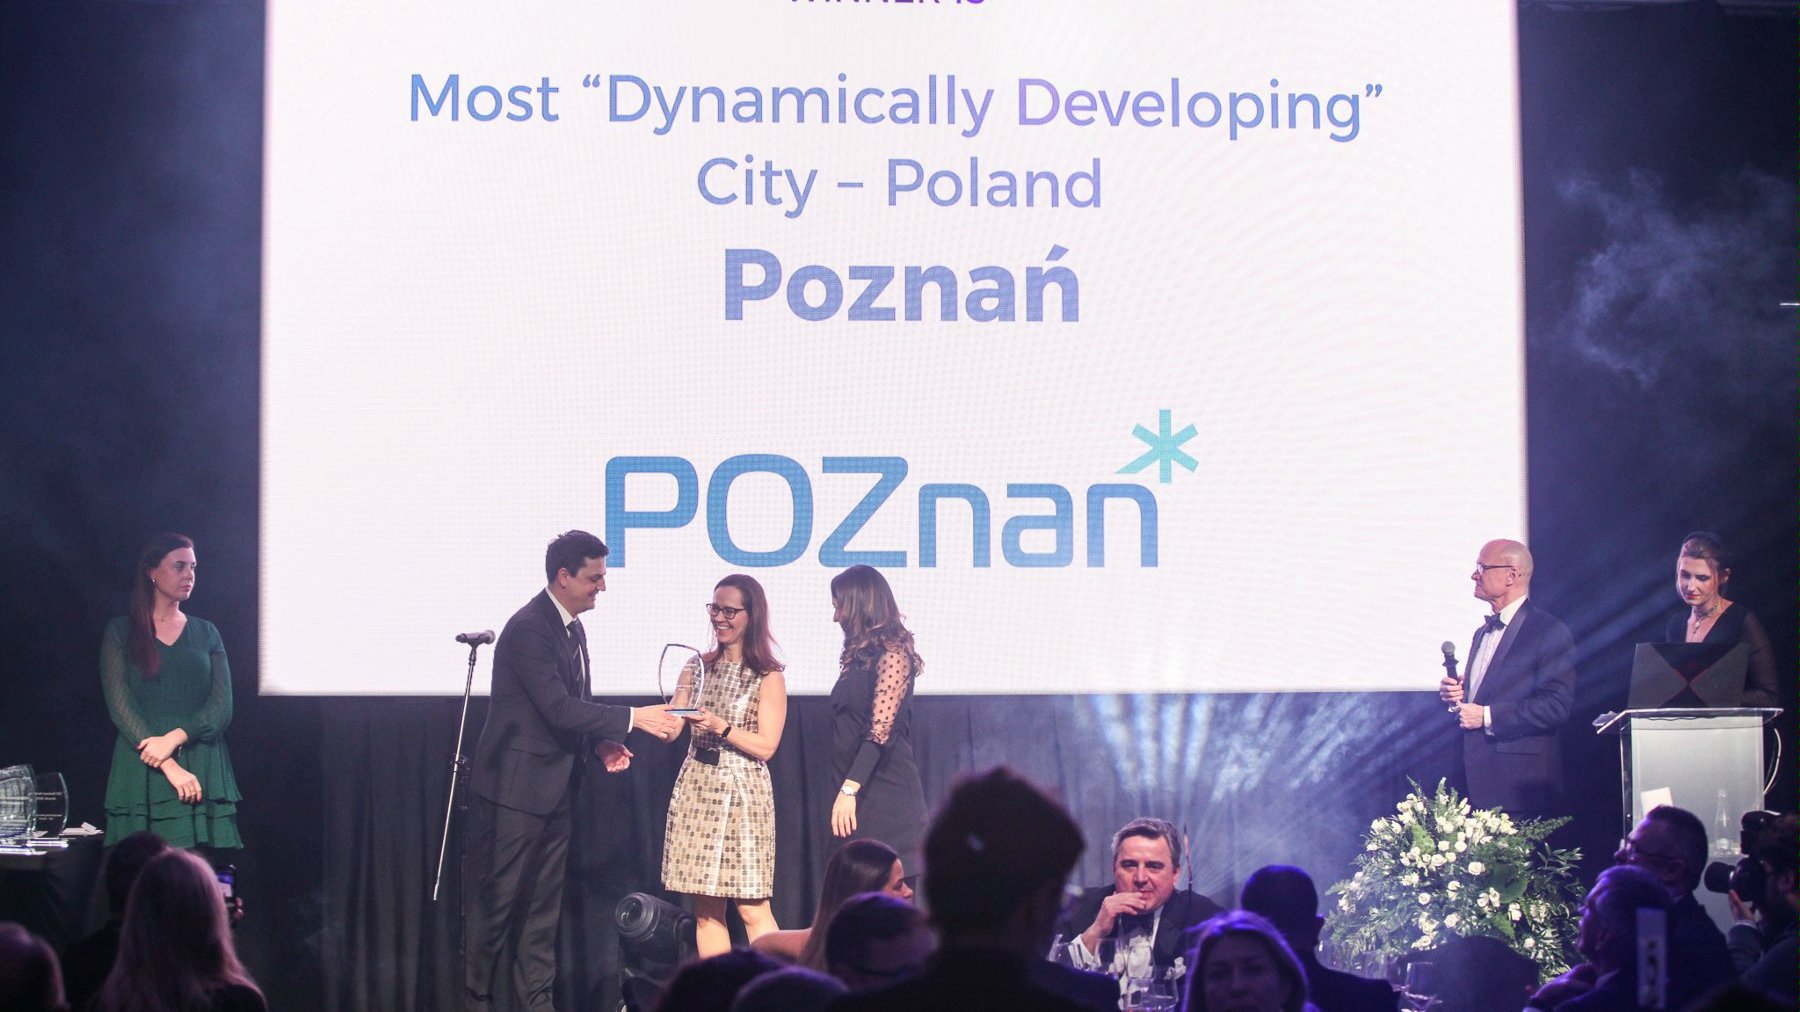 The image is a photograph from the gala. In the background, a large screen shows the caption: "Most Dynamically Developing City - Poland. Poznań'. In front of the screen stand the gala hosts. They are presenting the award to the Investor Relations Department.